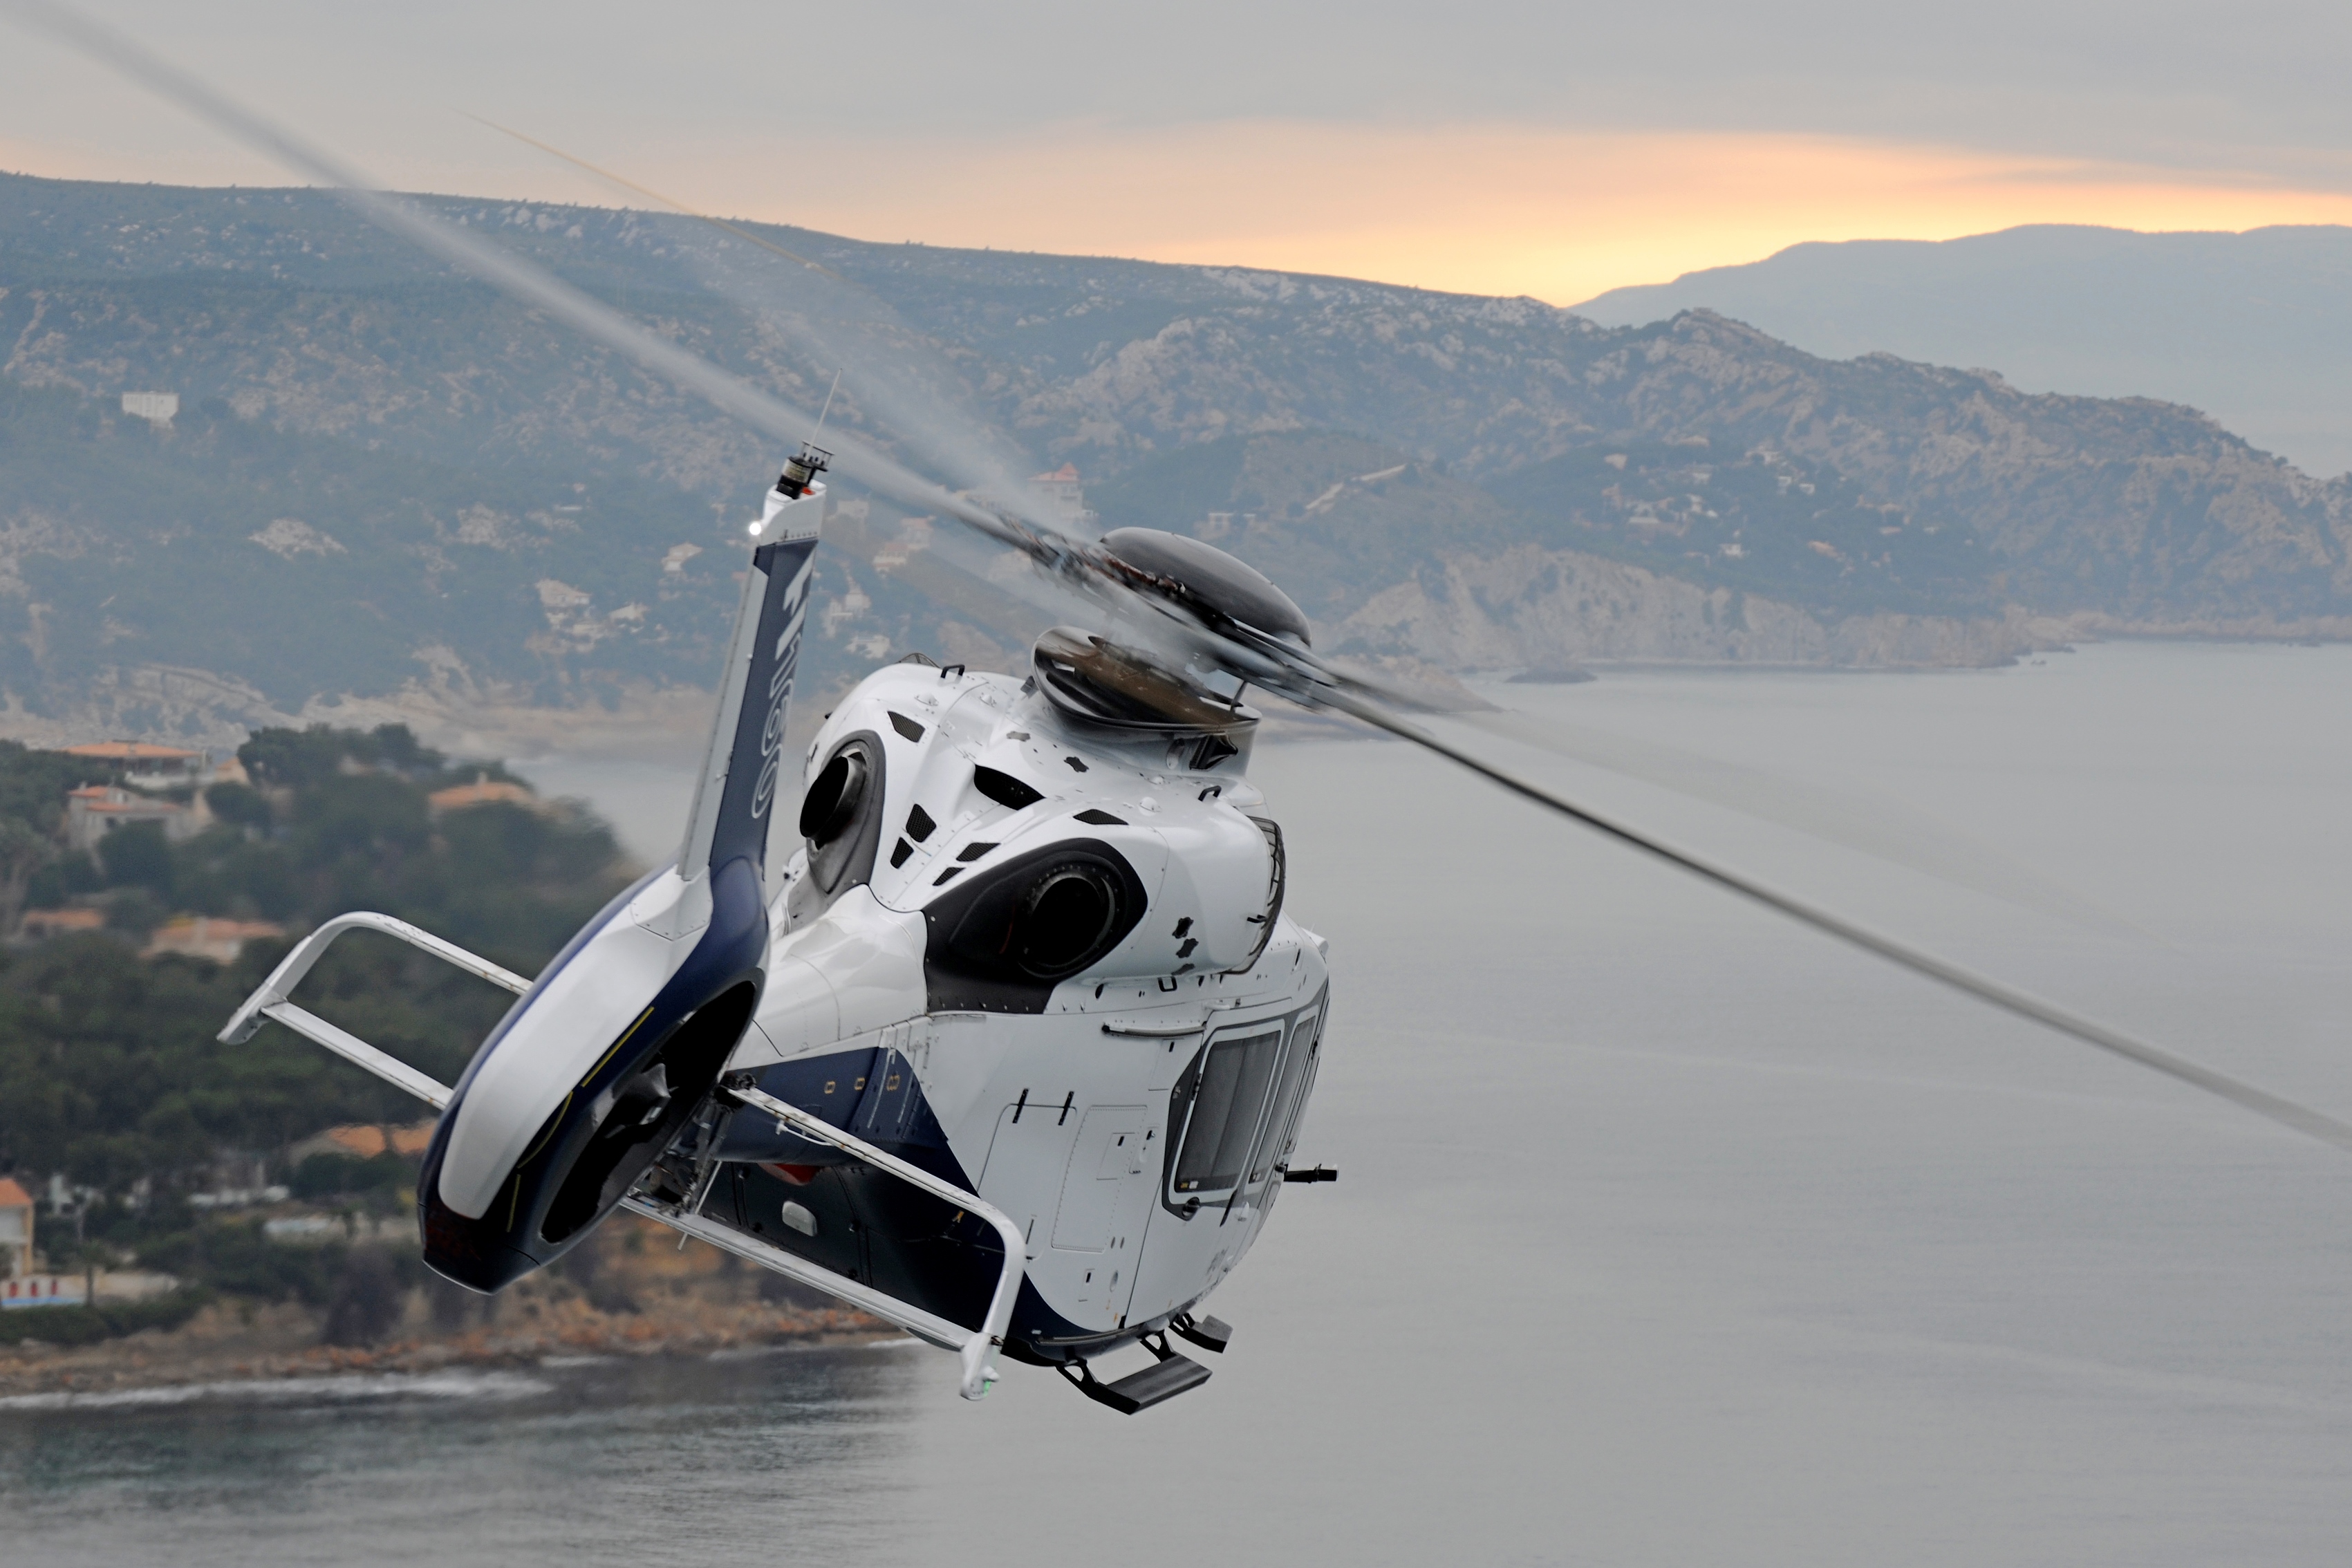 Airbus Helicopters' H160 prototype in the air for flight testing.